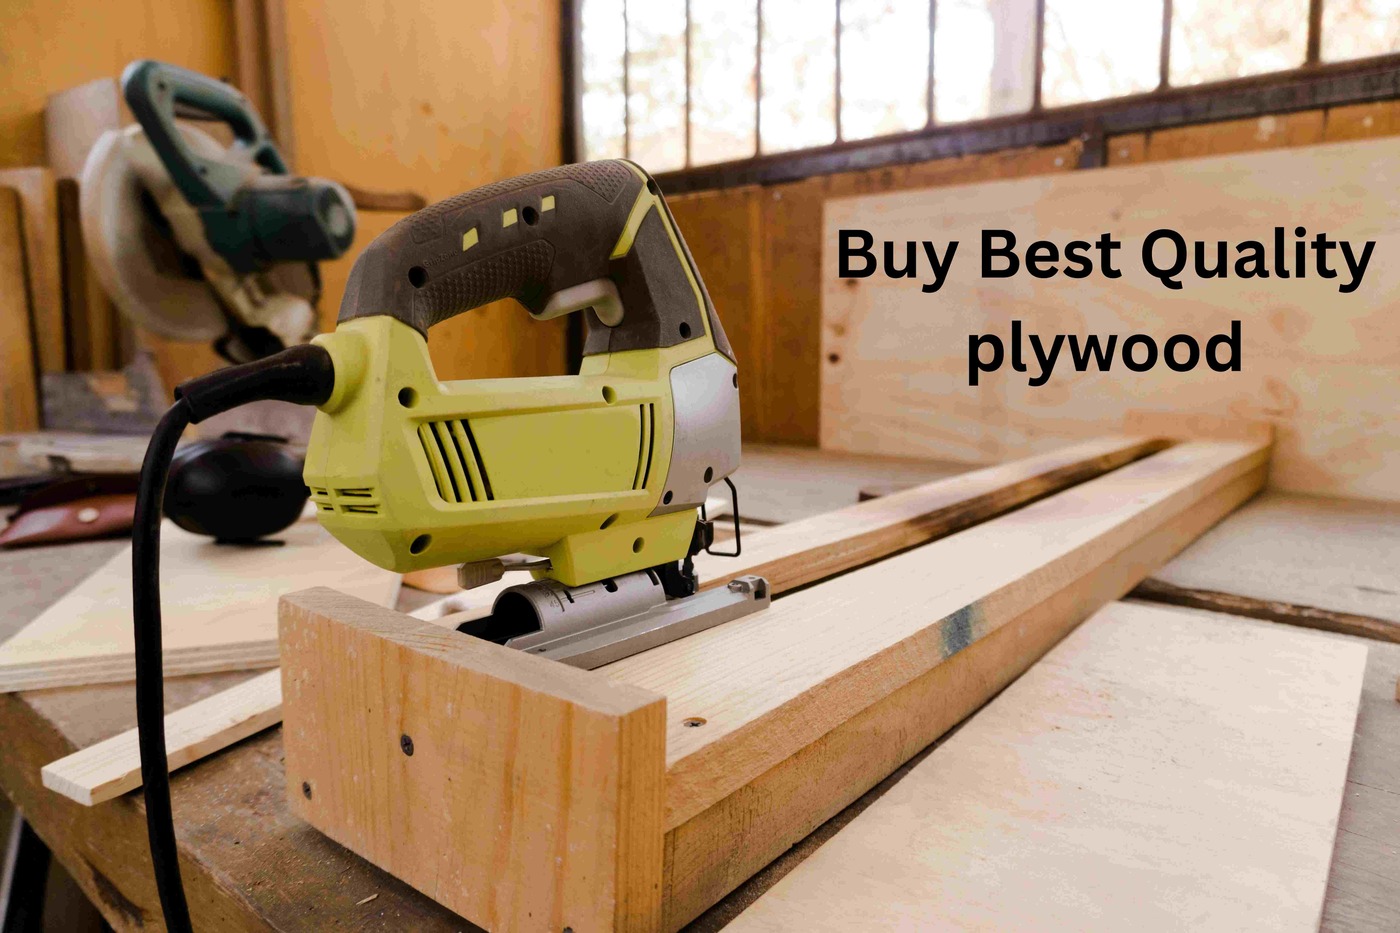 Plywood manufacturers